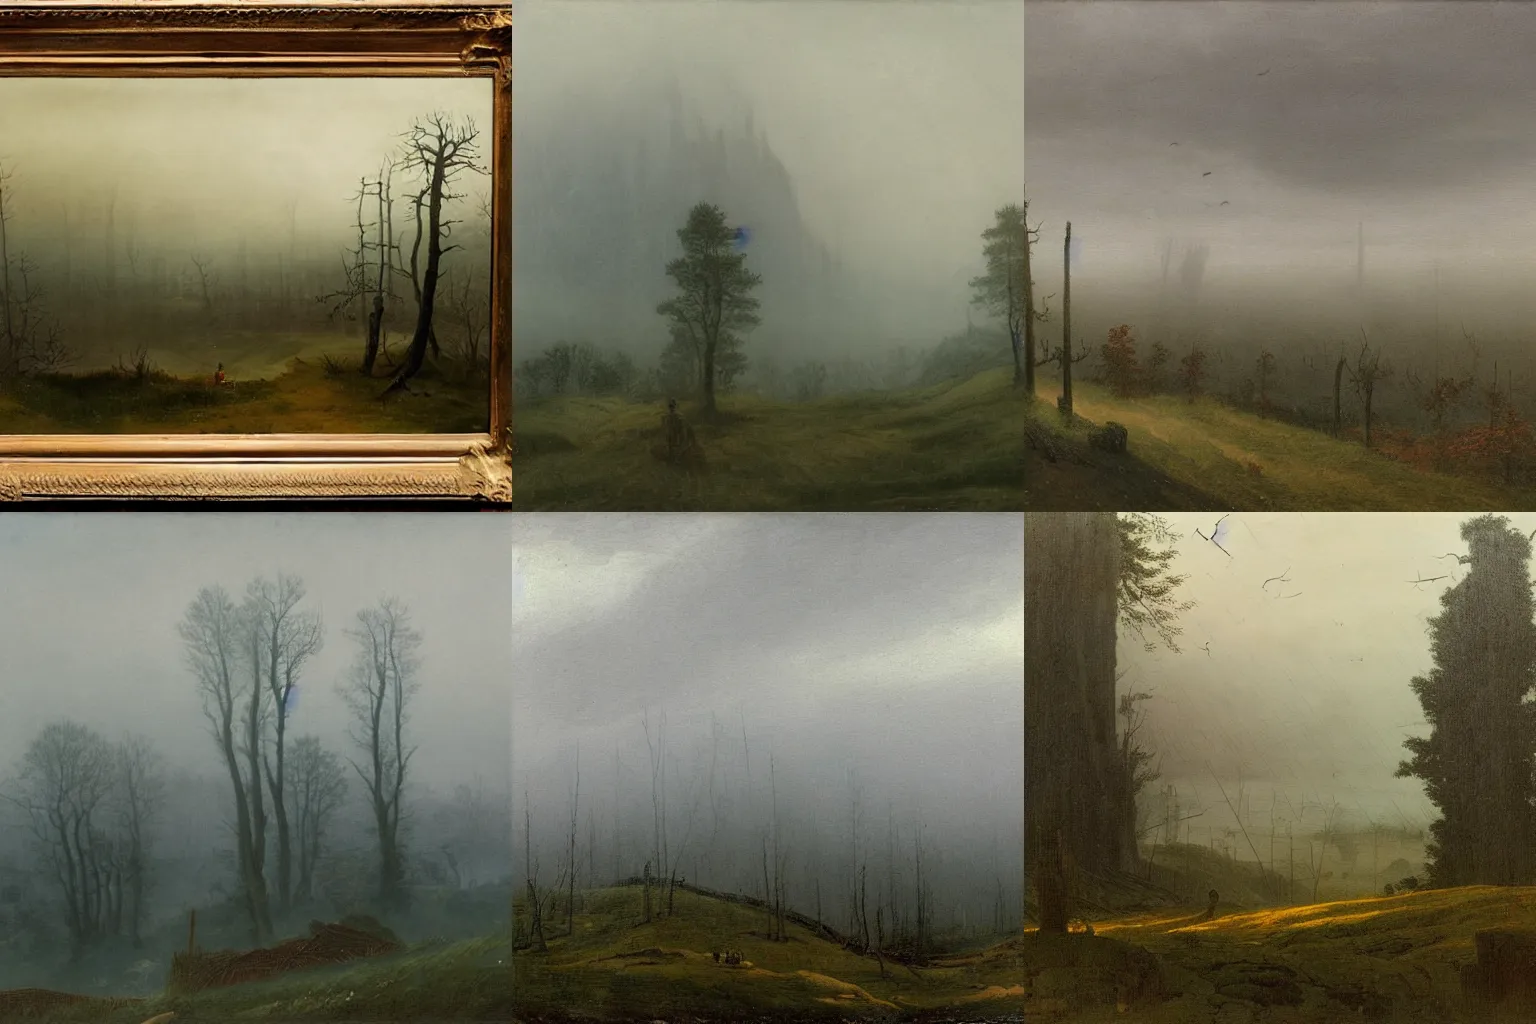 Prompt: gigantic and forlorn pieces of furniture loom in the distance of a dreary, misty landscape painted by Caspar David Friedrich